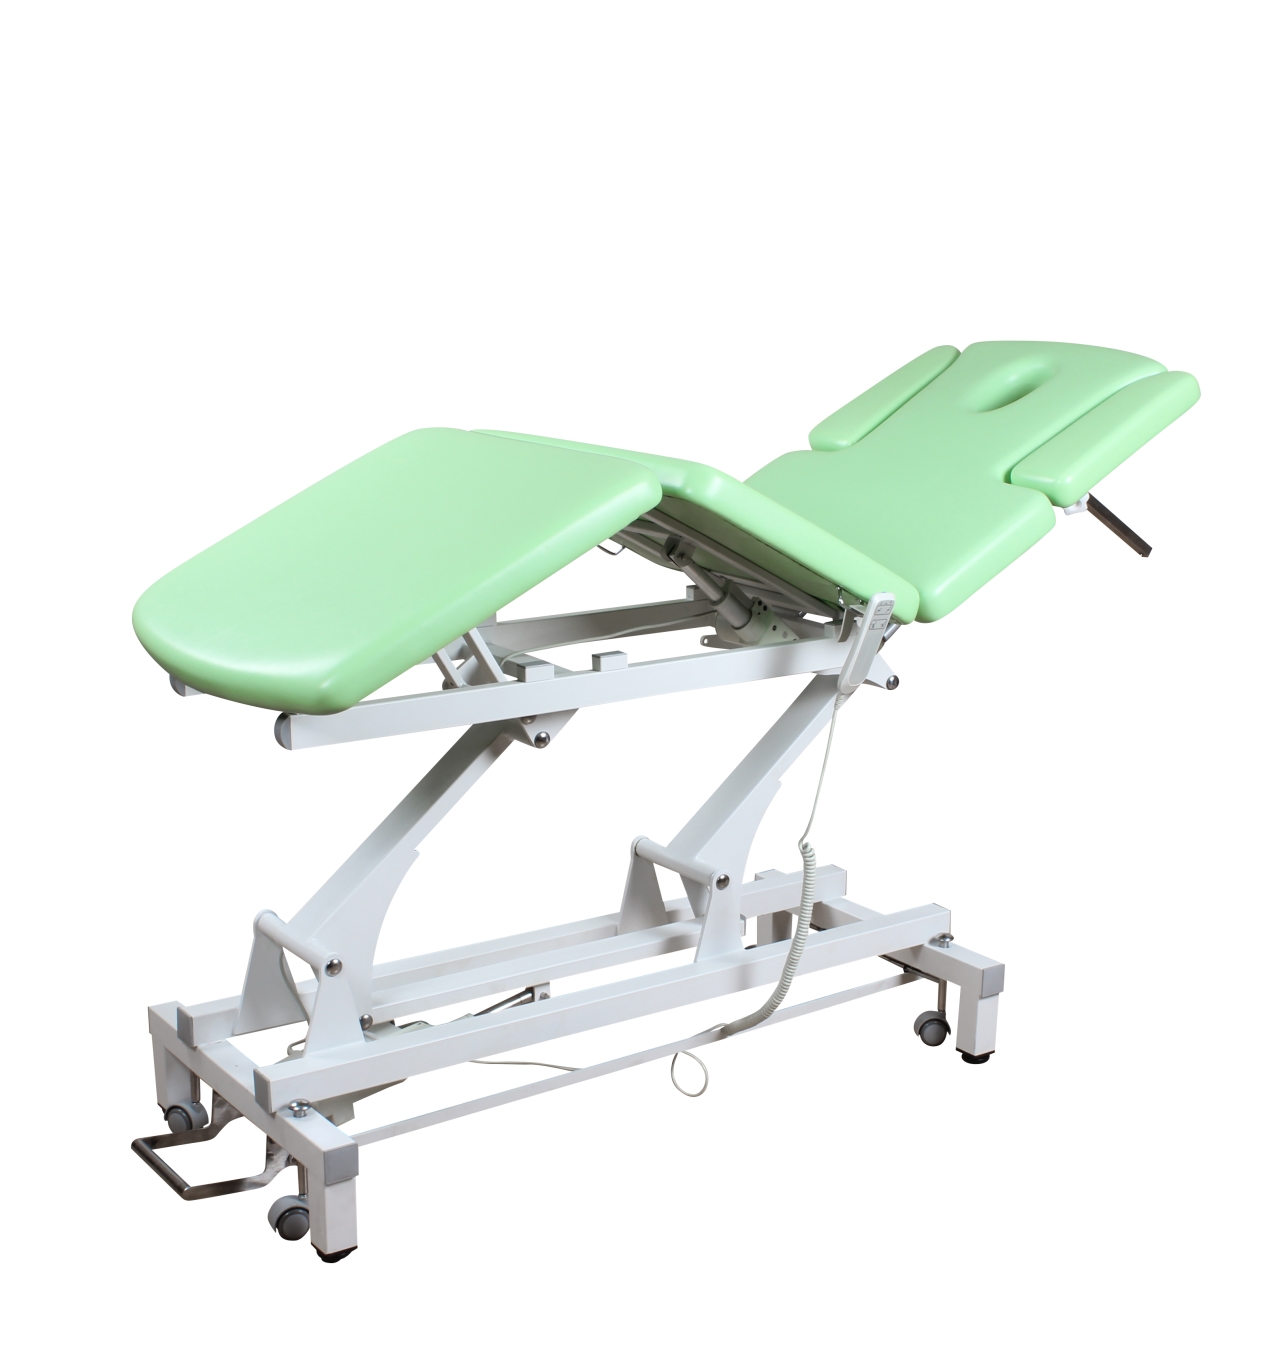 DP-S803 Physiotherapy Treatment Examination Table